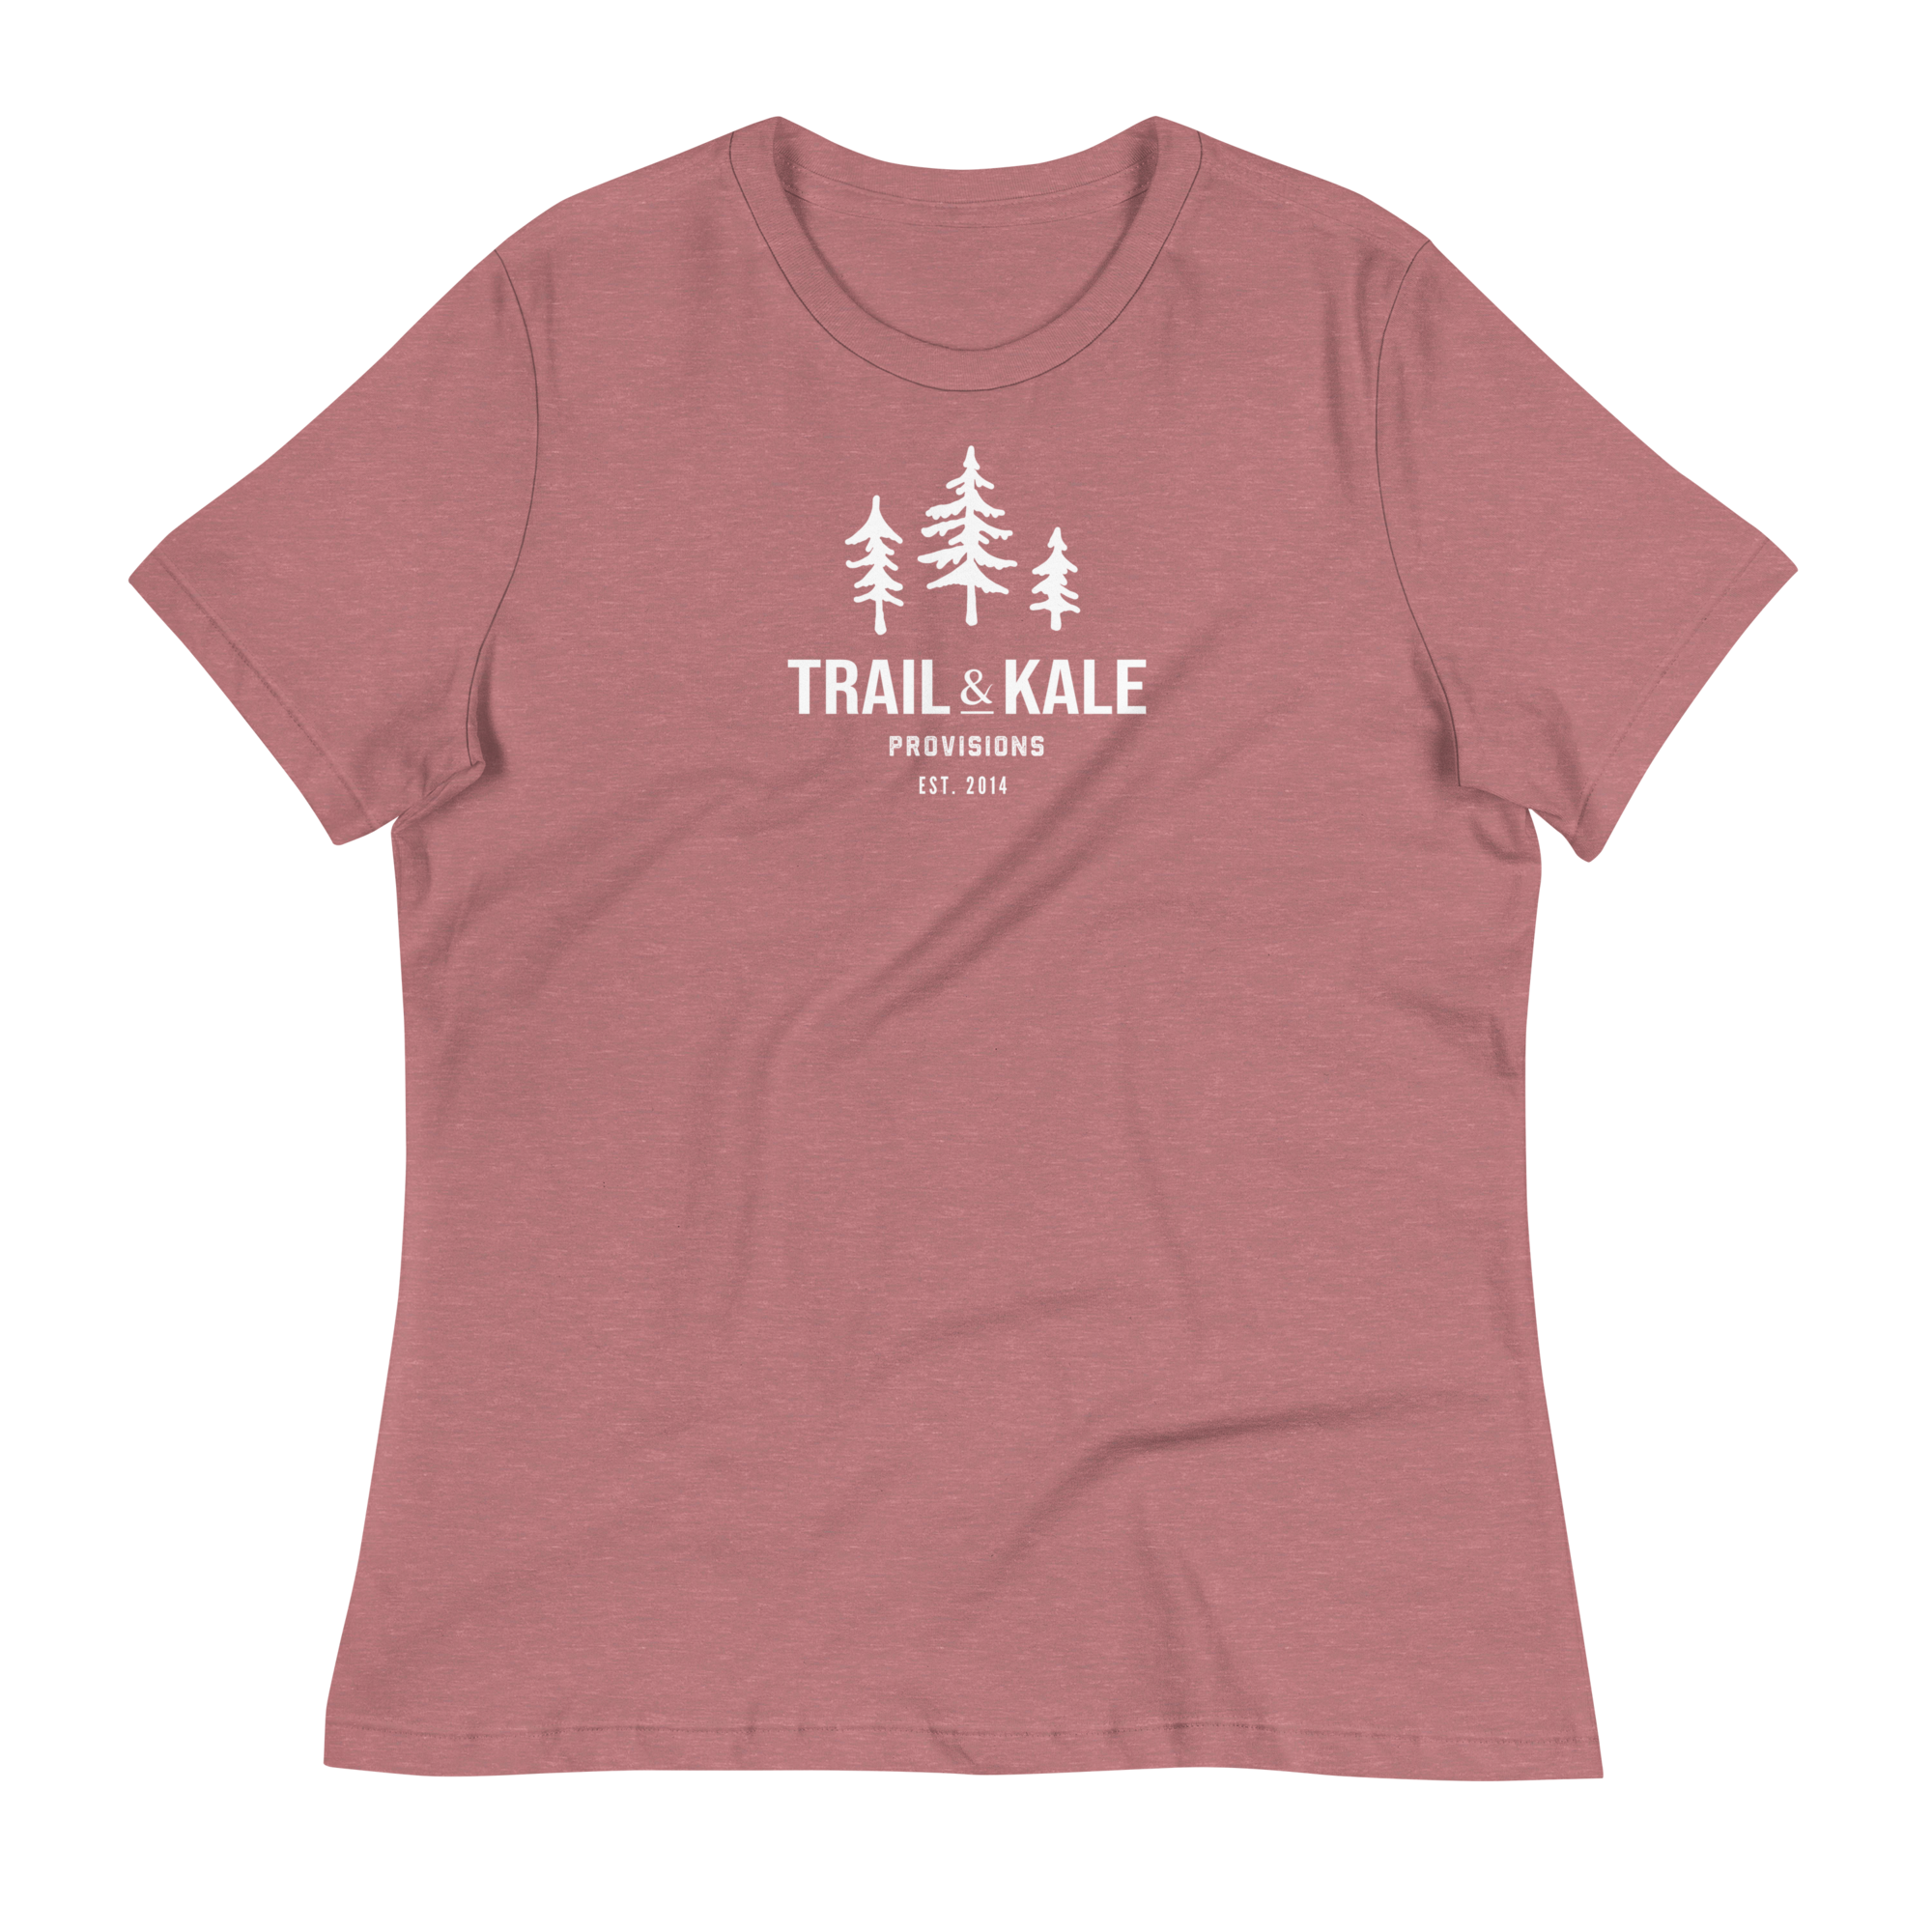 Trail & Kale Classic Tee "Forest Collection" - Women's-Specific Fit